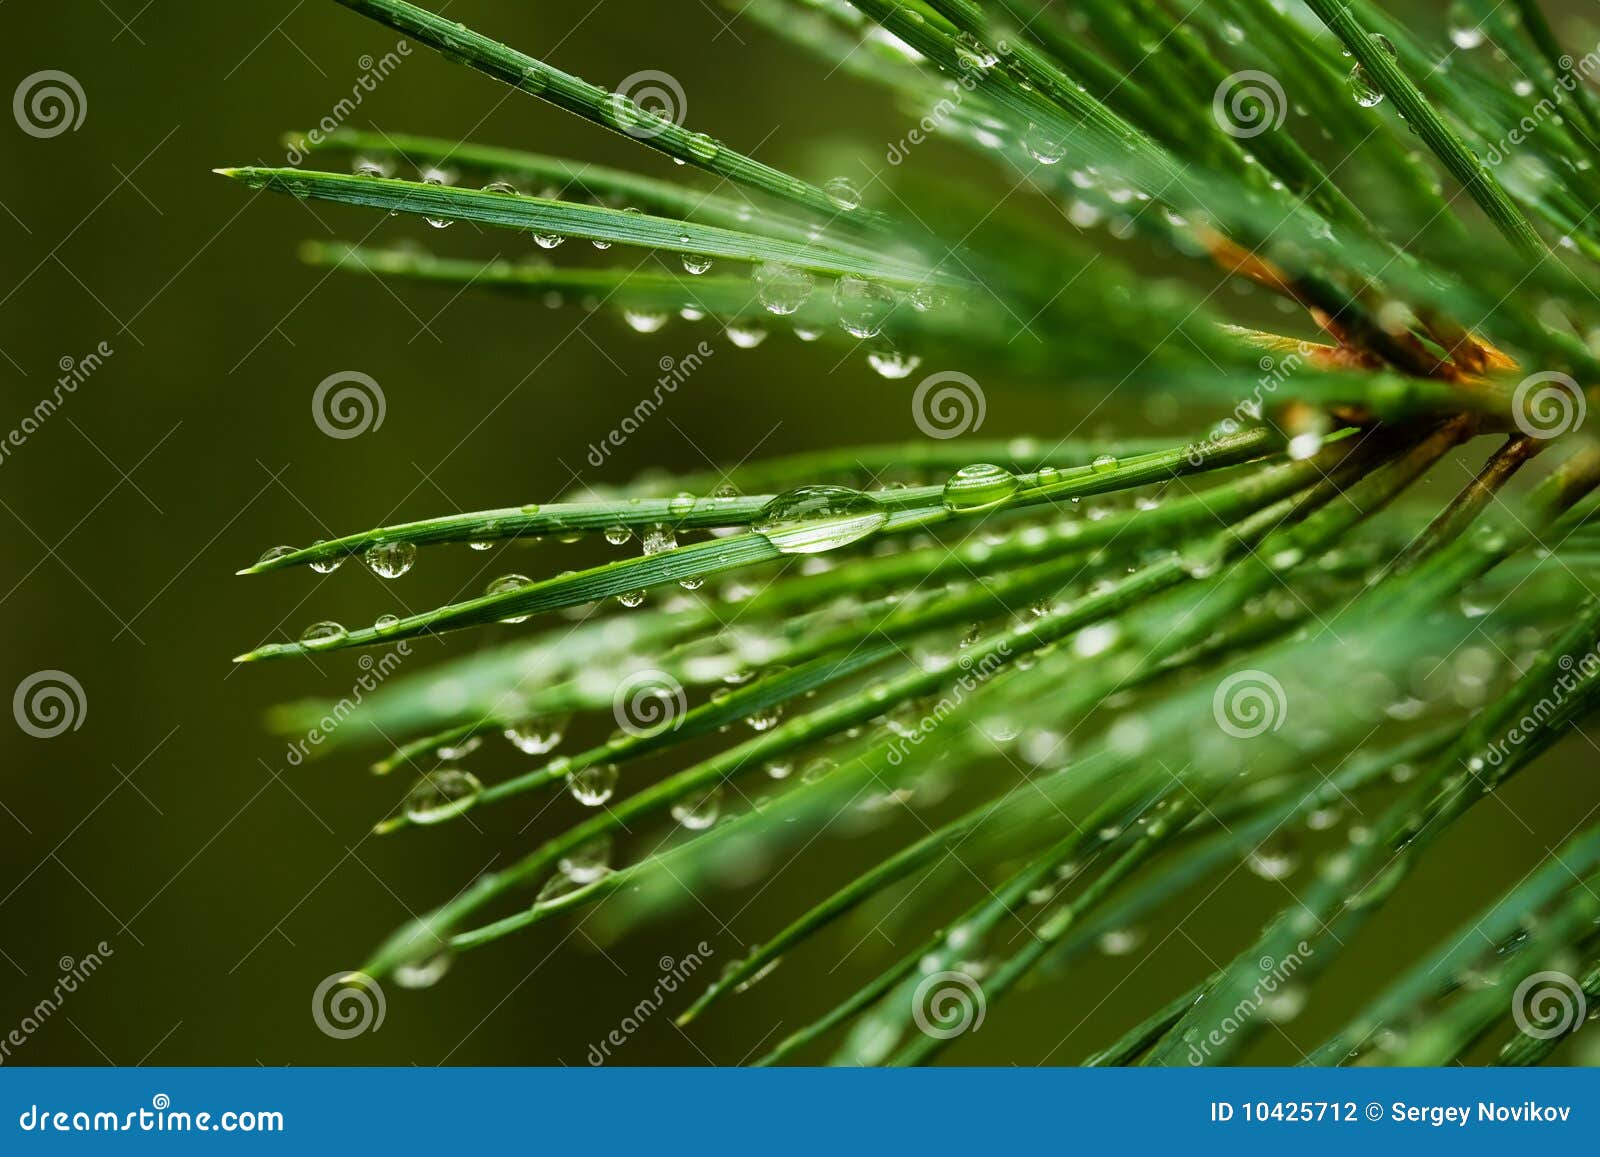 pine needle with dewdrops